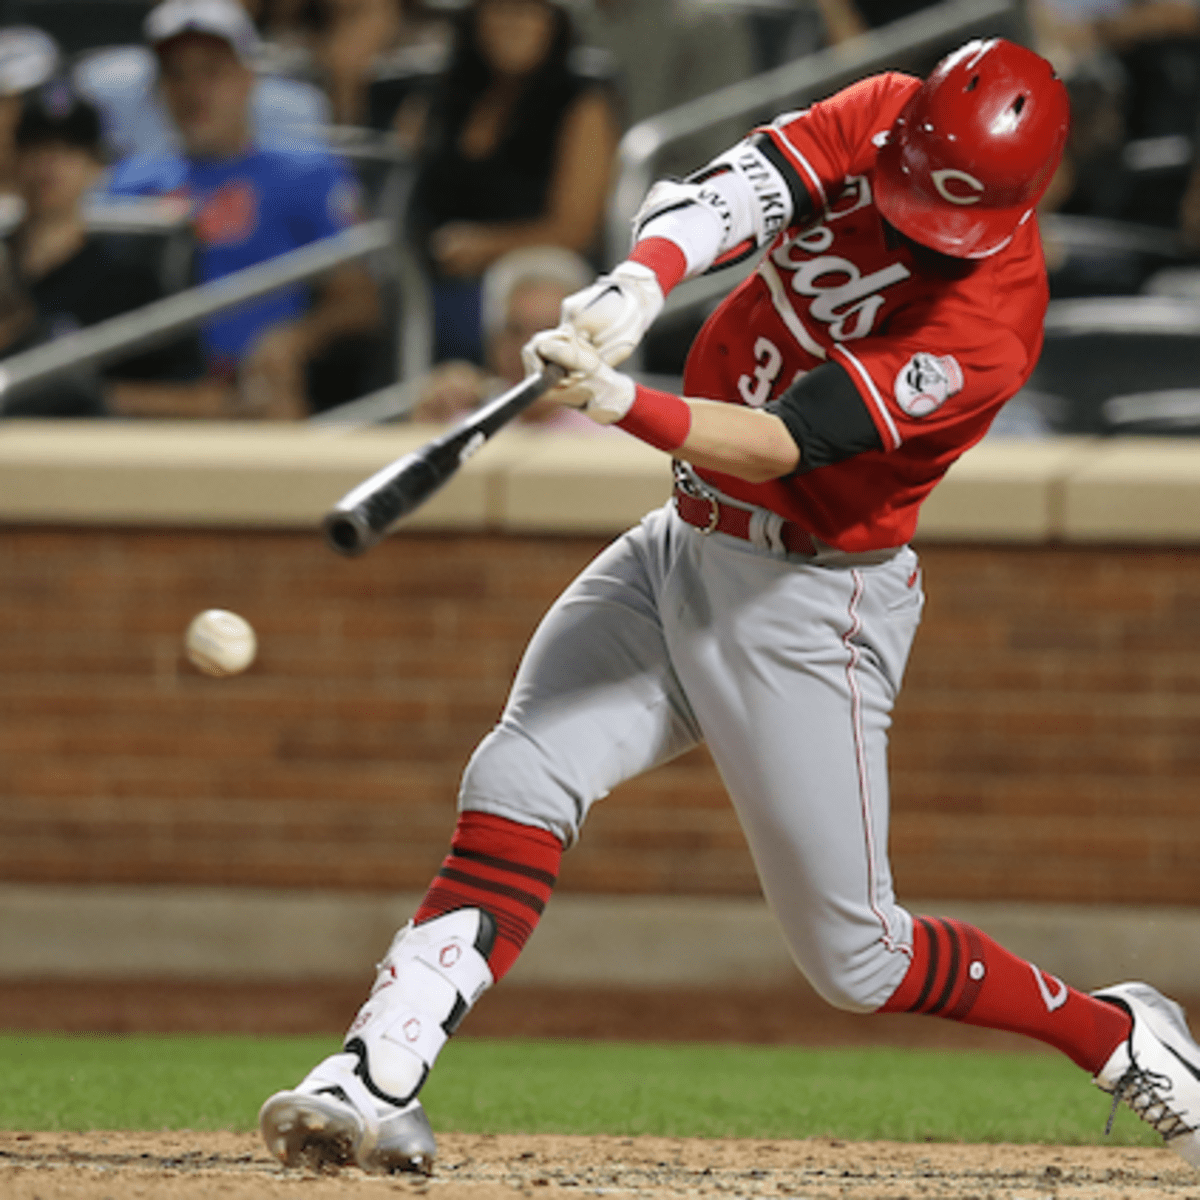 Four's a crowd: Jesse Winker is 'odd man out' of Reds' now-defunct